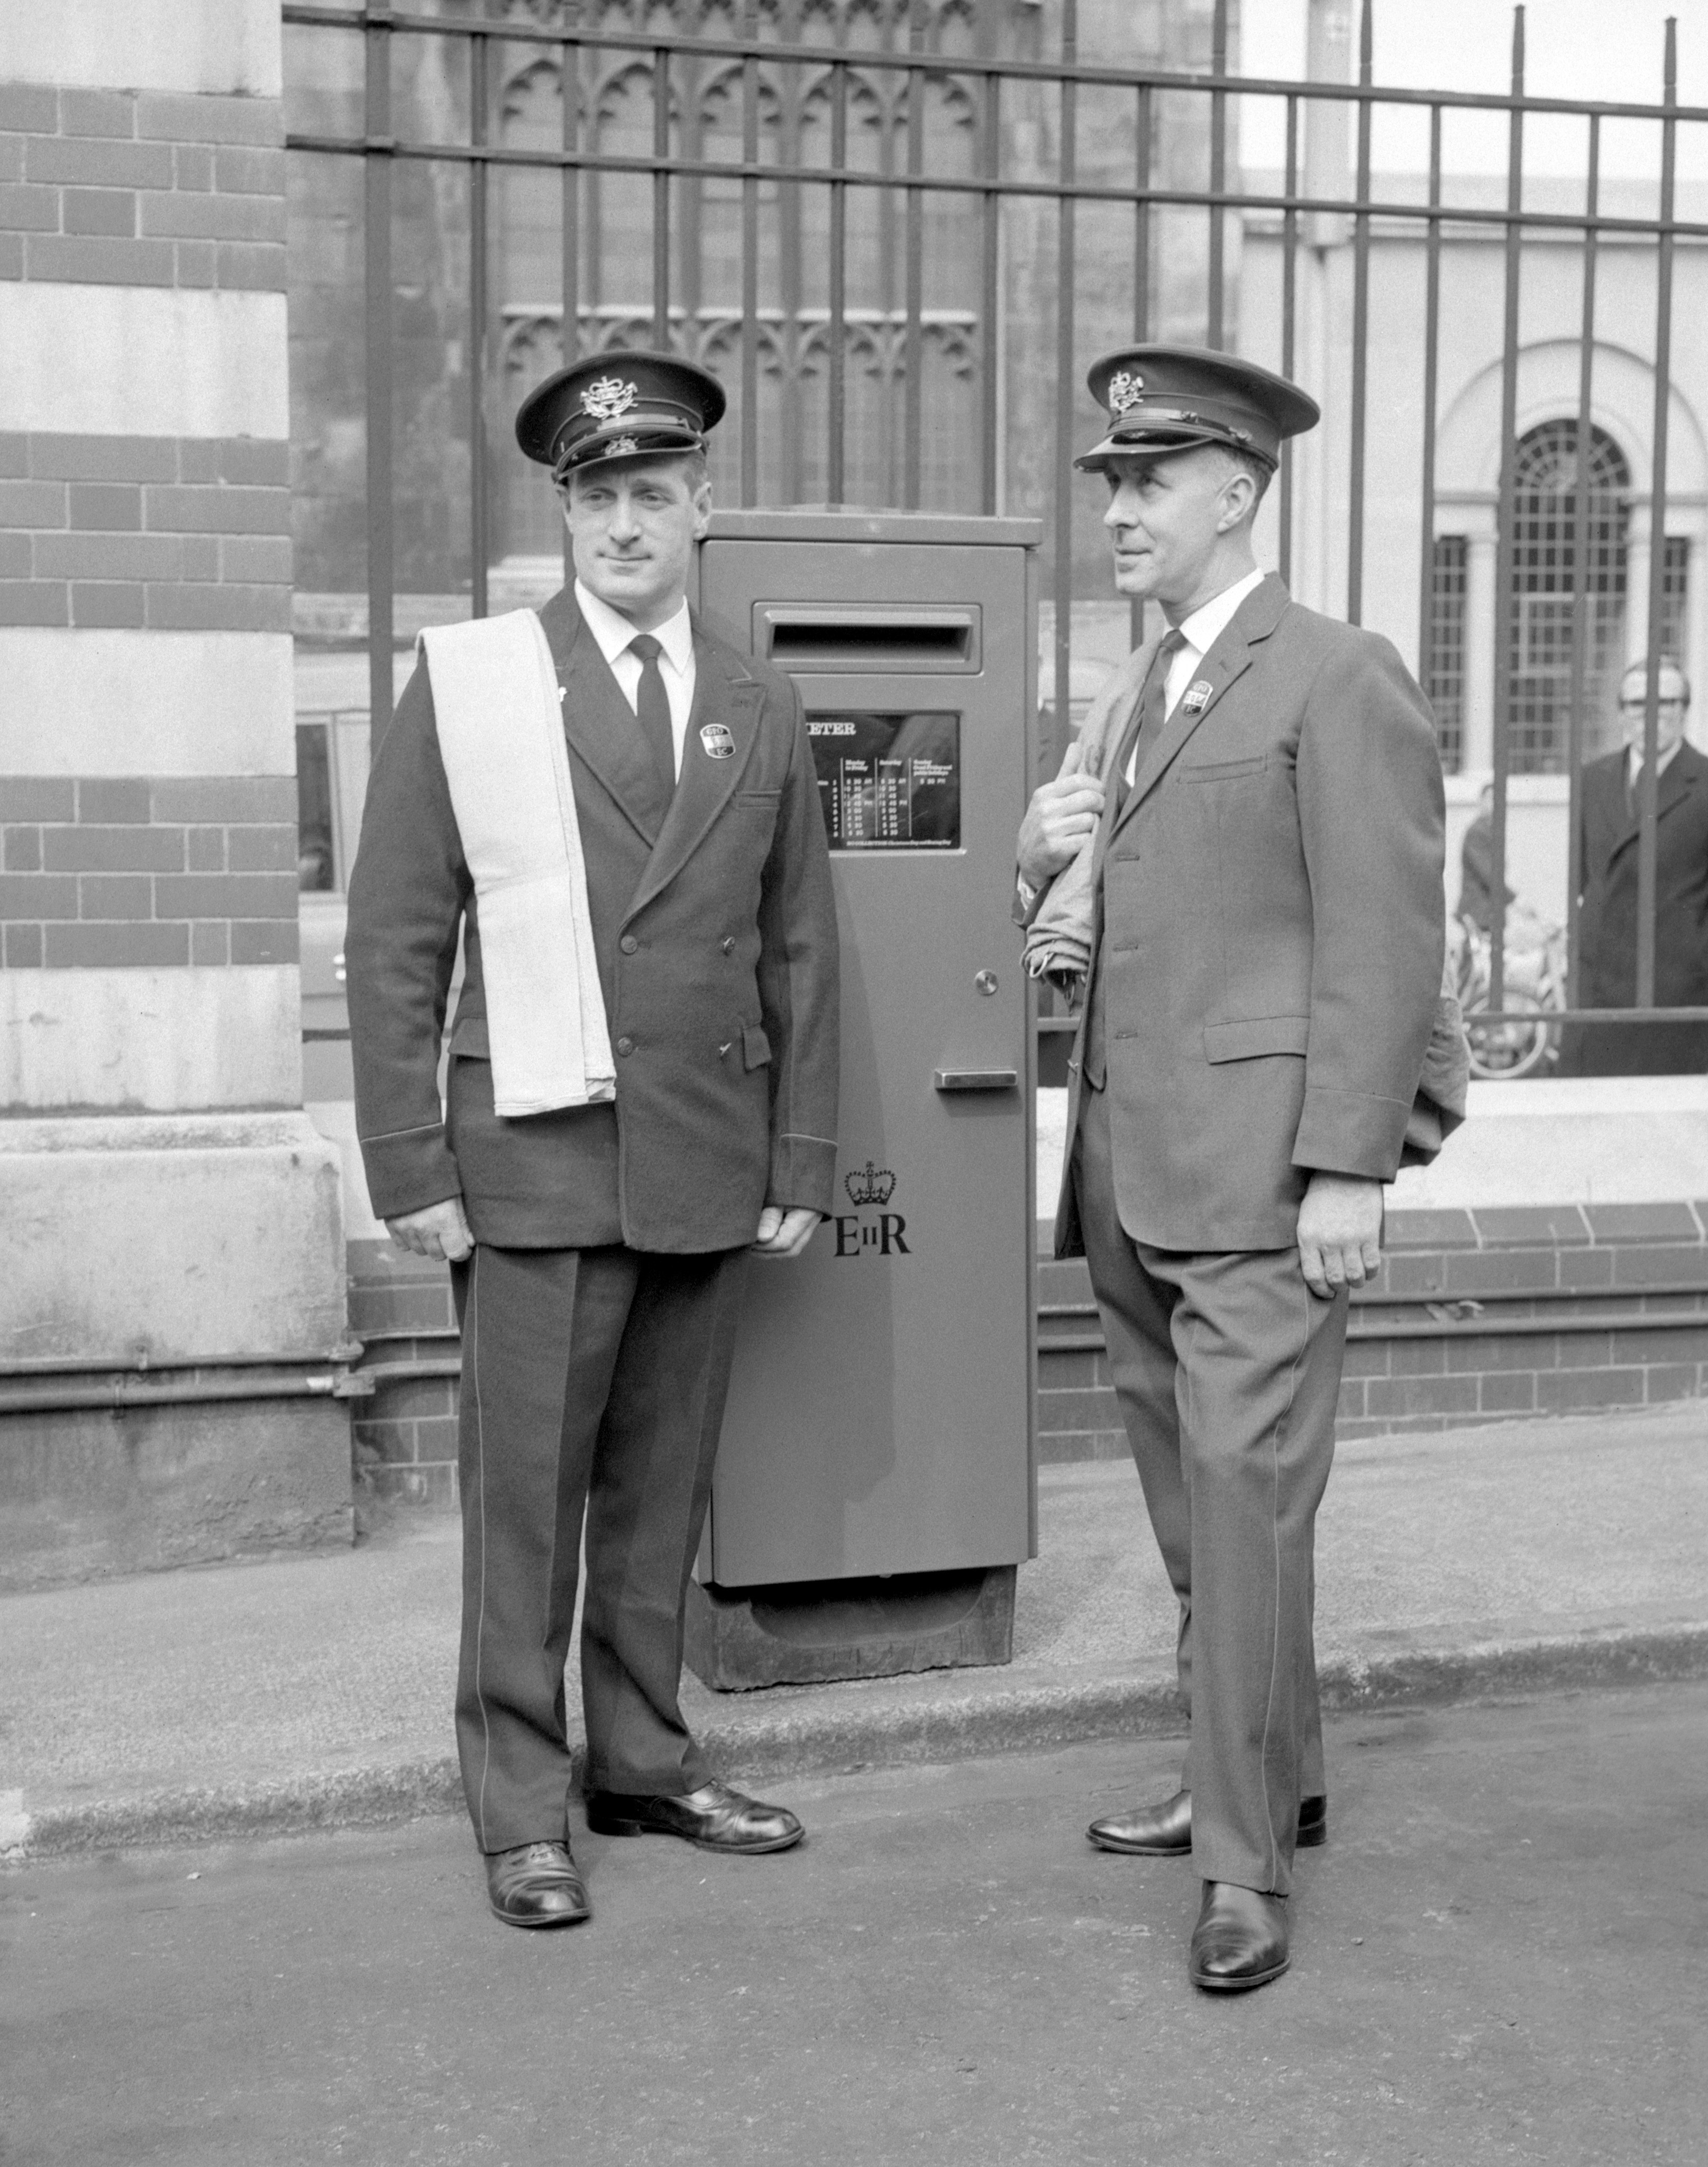 New Postal Service uniforms in 1969